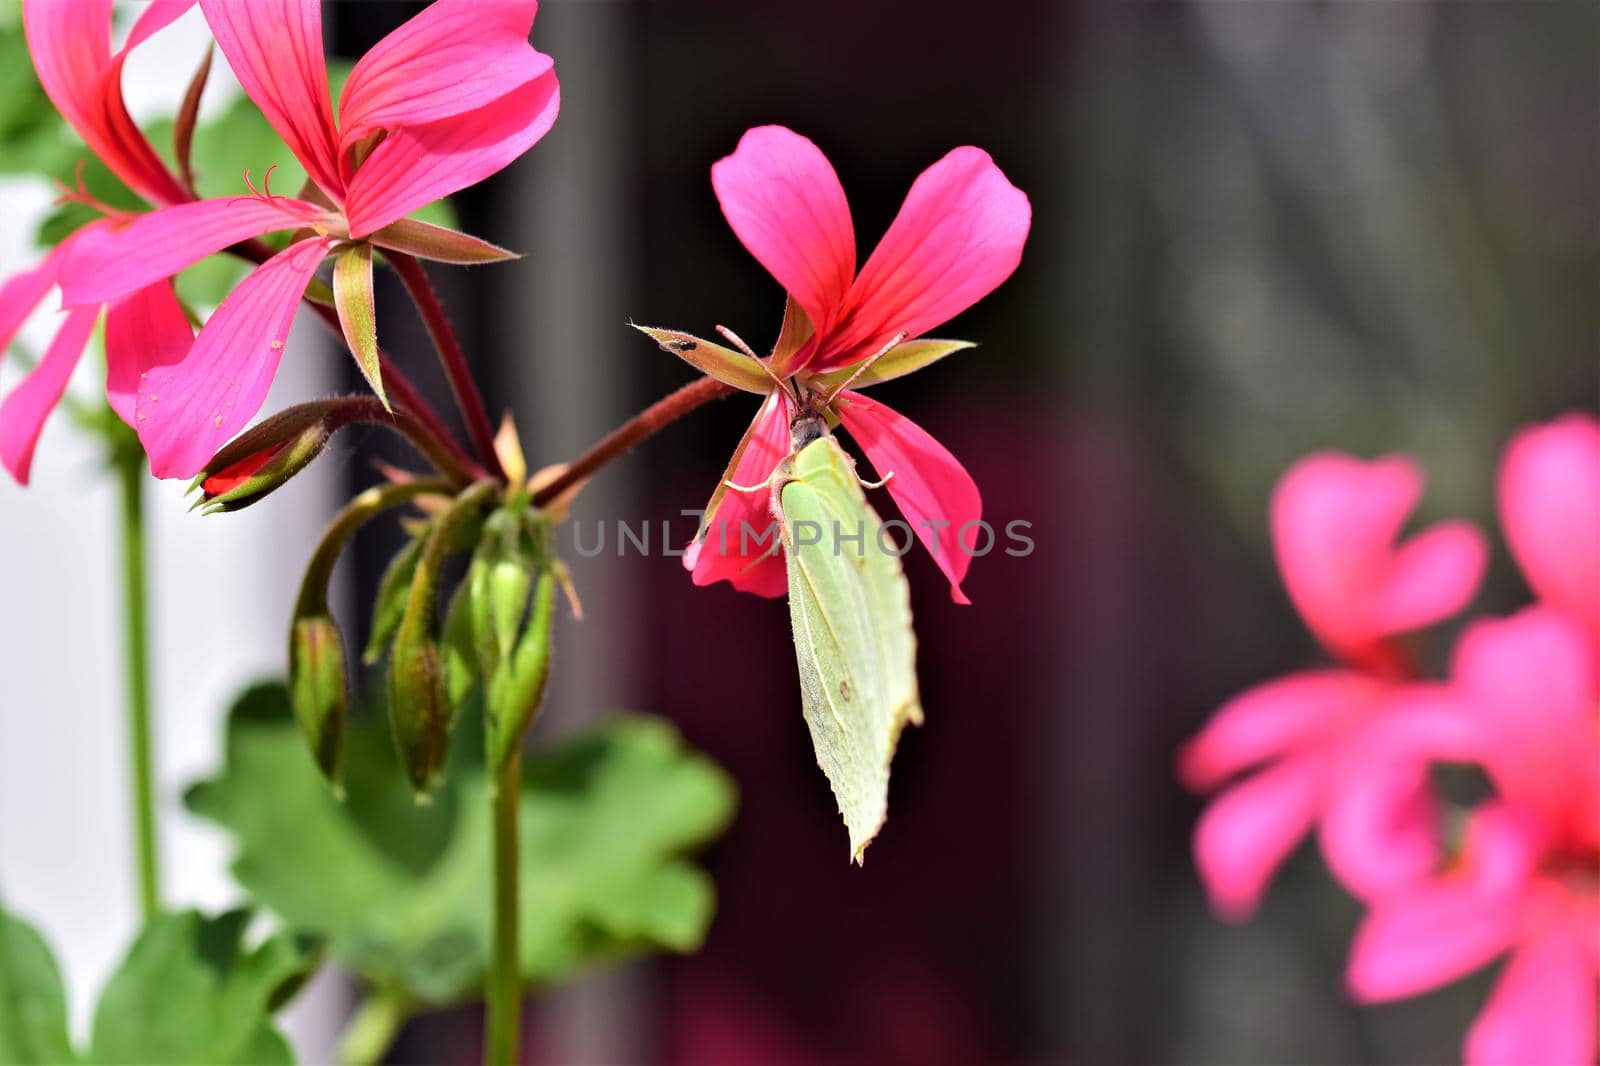 Pieris rapae - cabbage white butterfly at a pink geranium blossom as a close up by Luise123